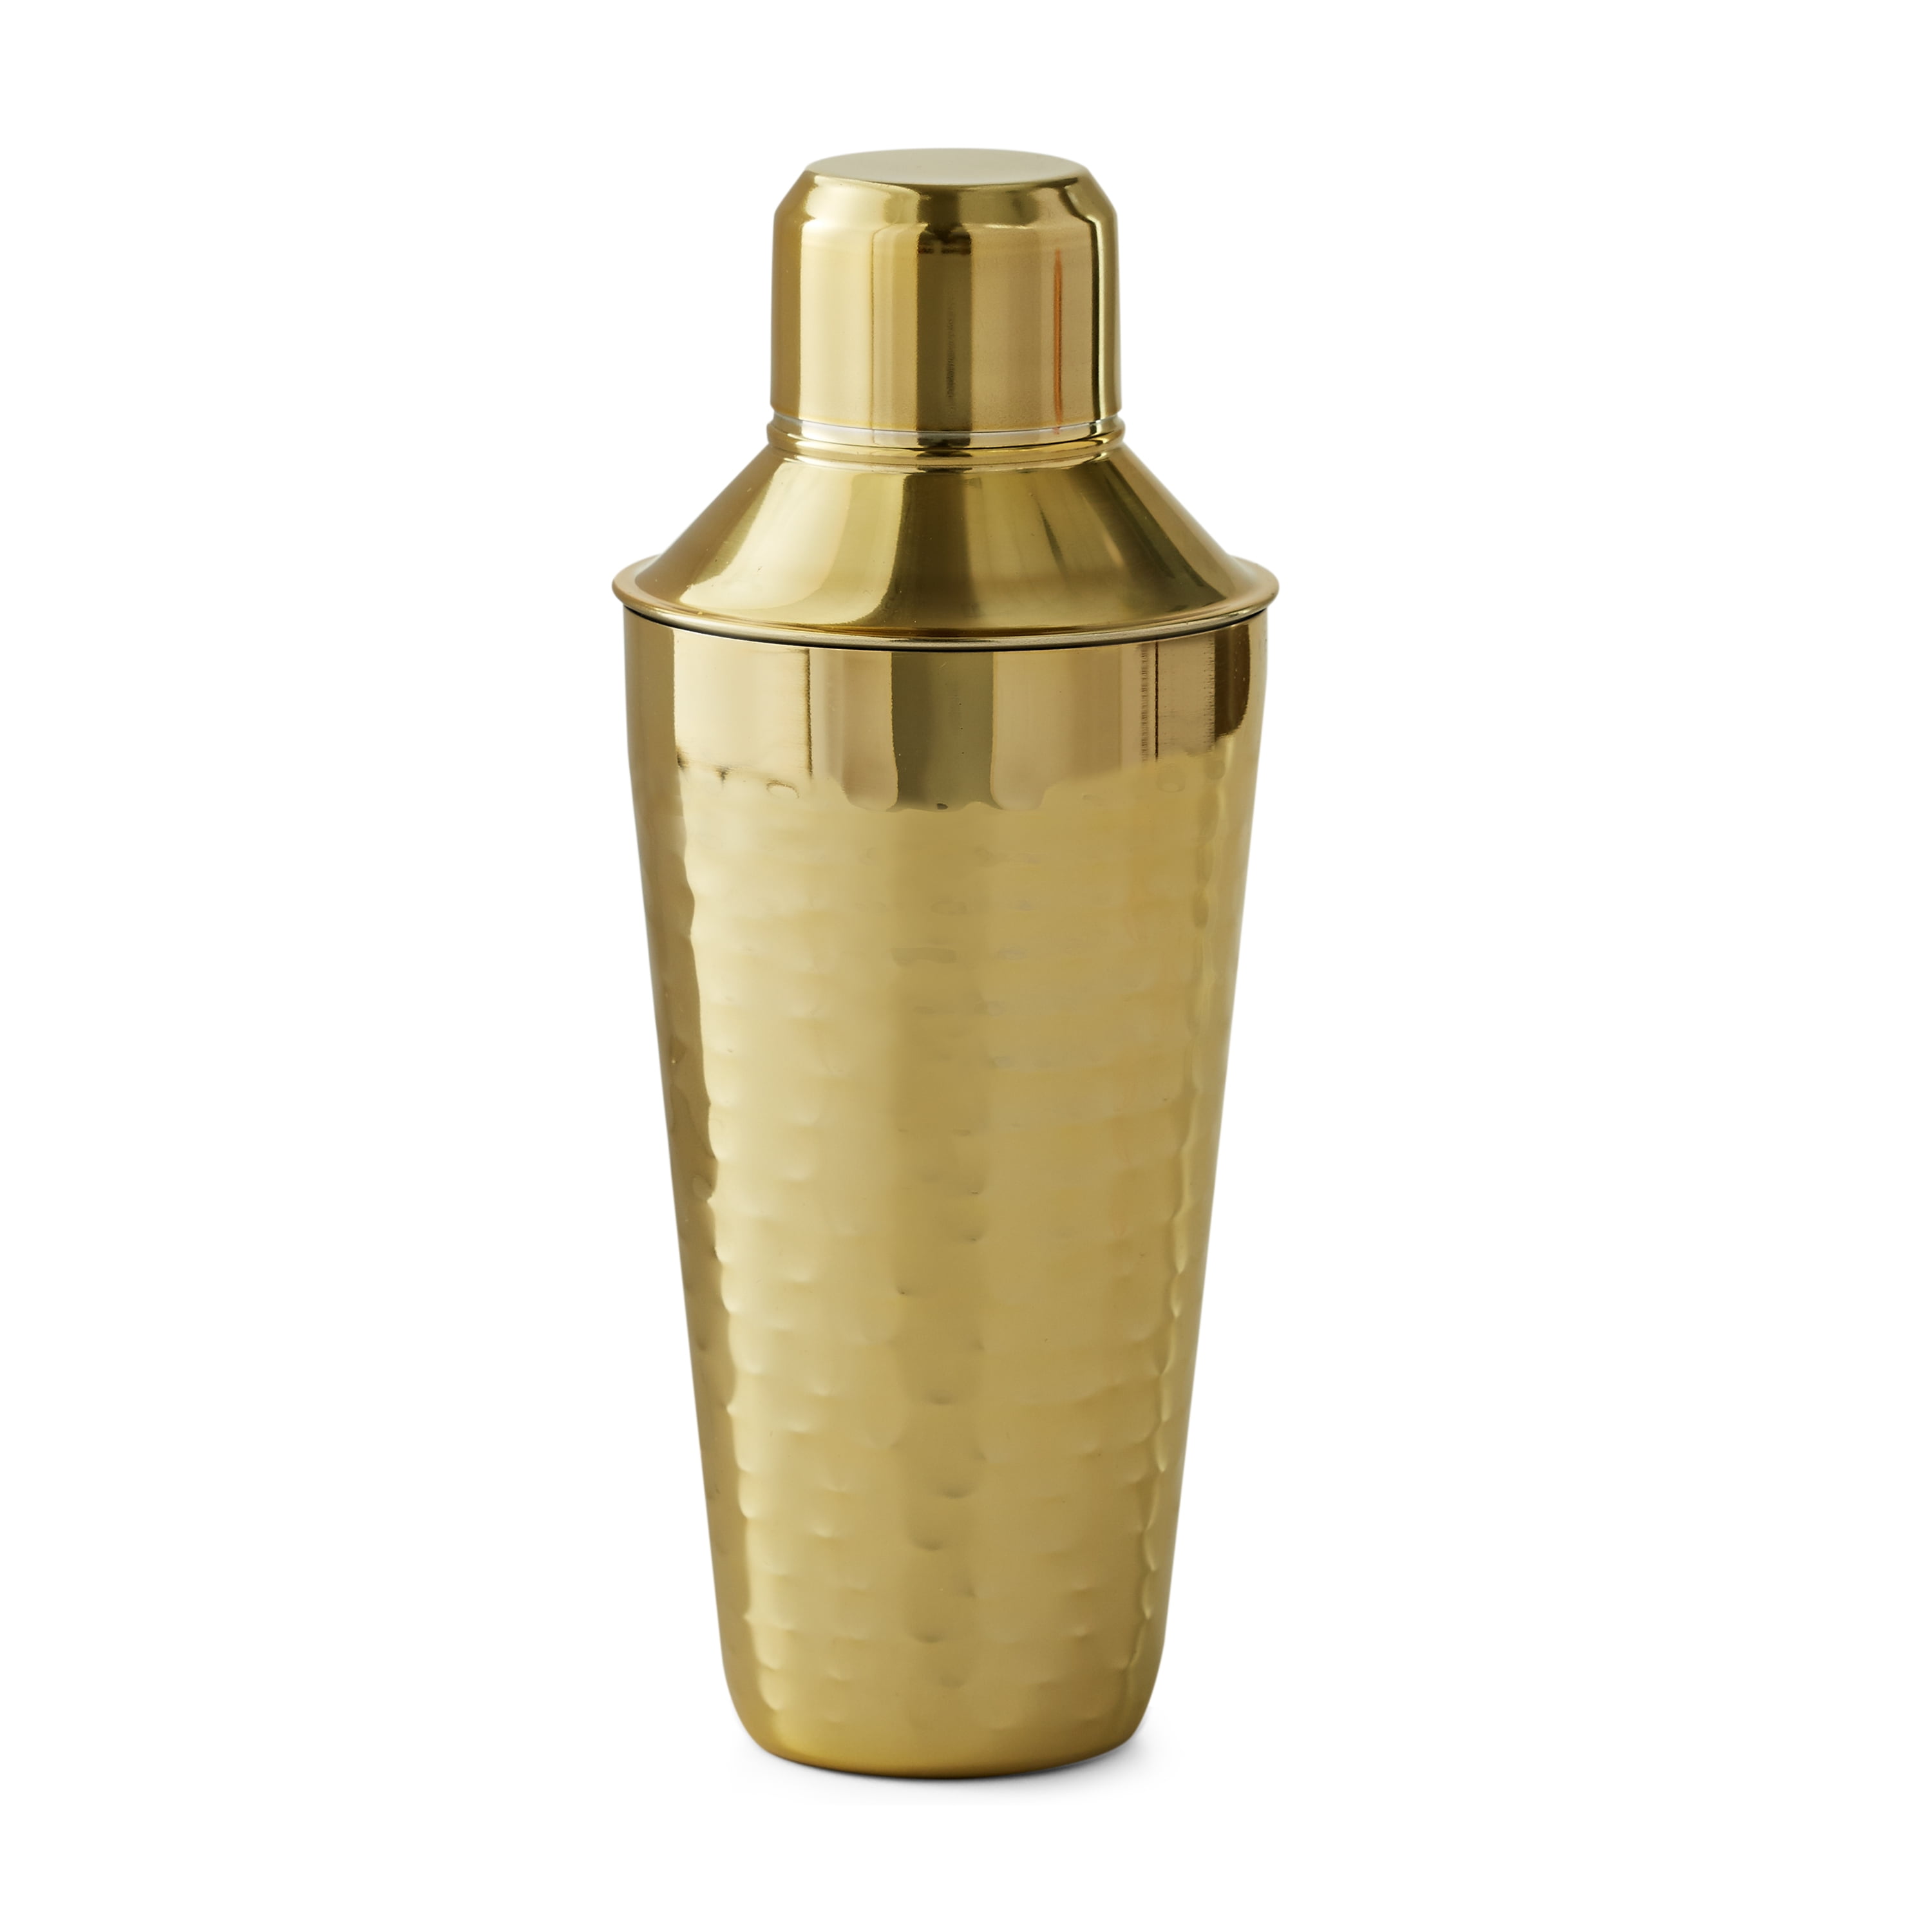 Mainstays 25-Ounce Stainless Steel Cocktail Shaker, Hammered Brass ...